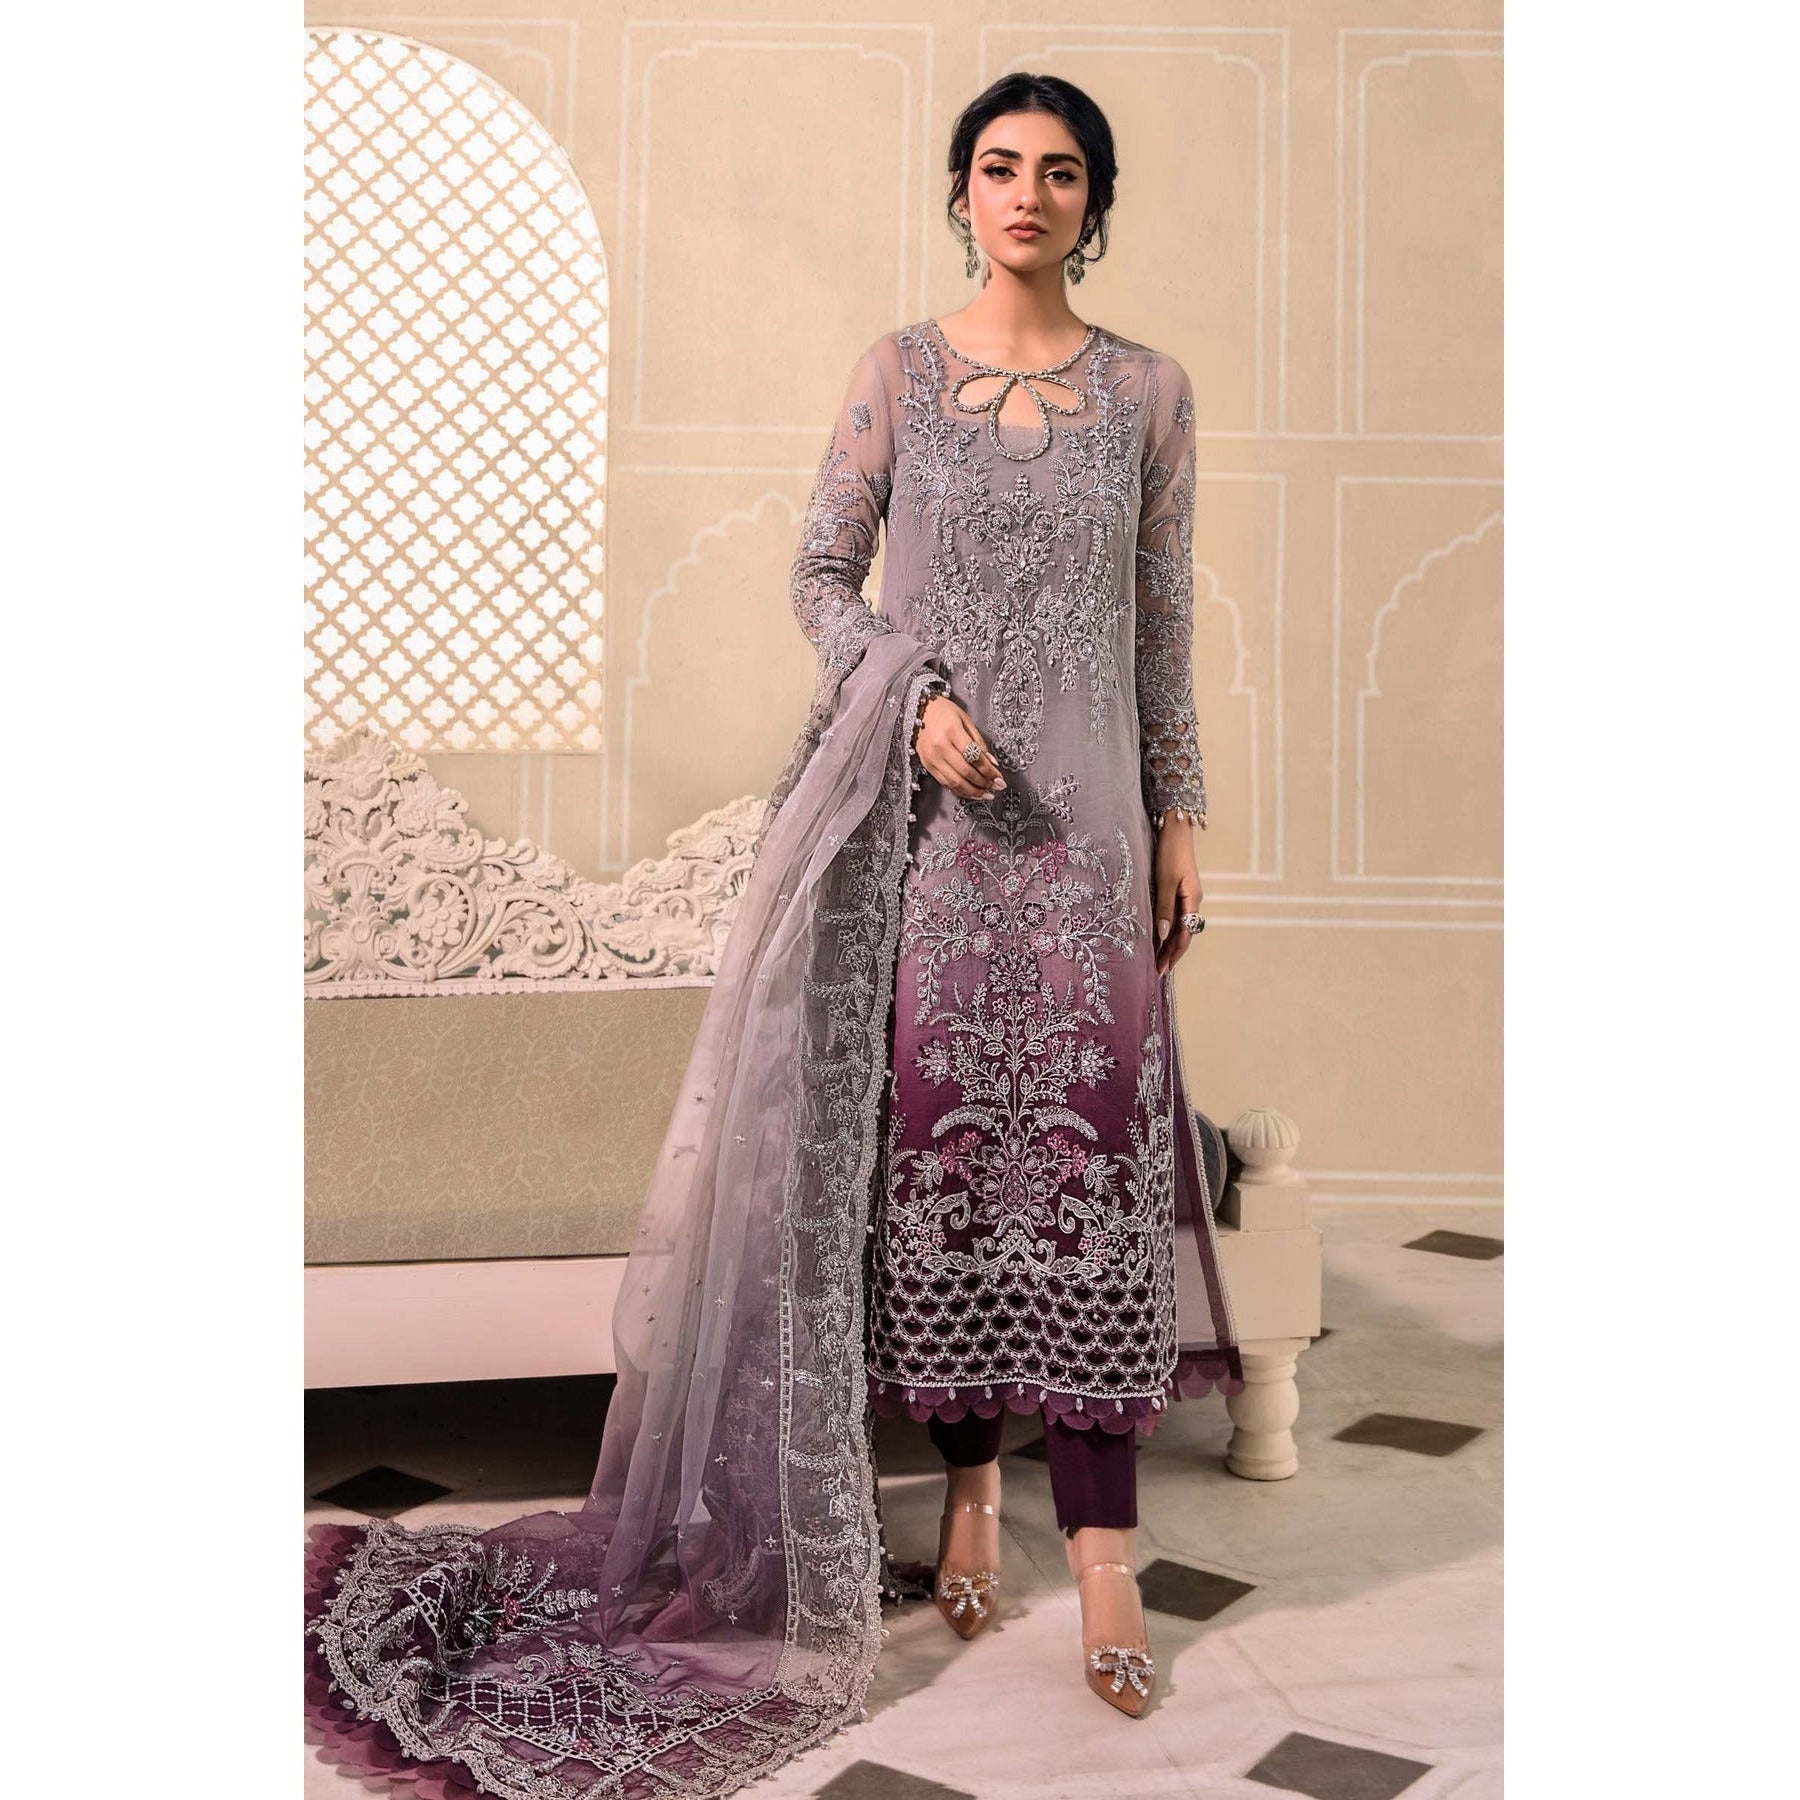 Maria.B. | Mbroidered Heritage Edition '23 | BD-2605 - House of Faiza